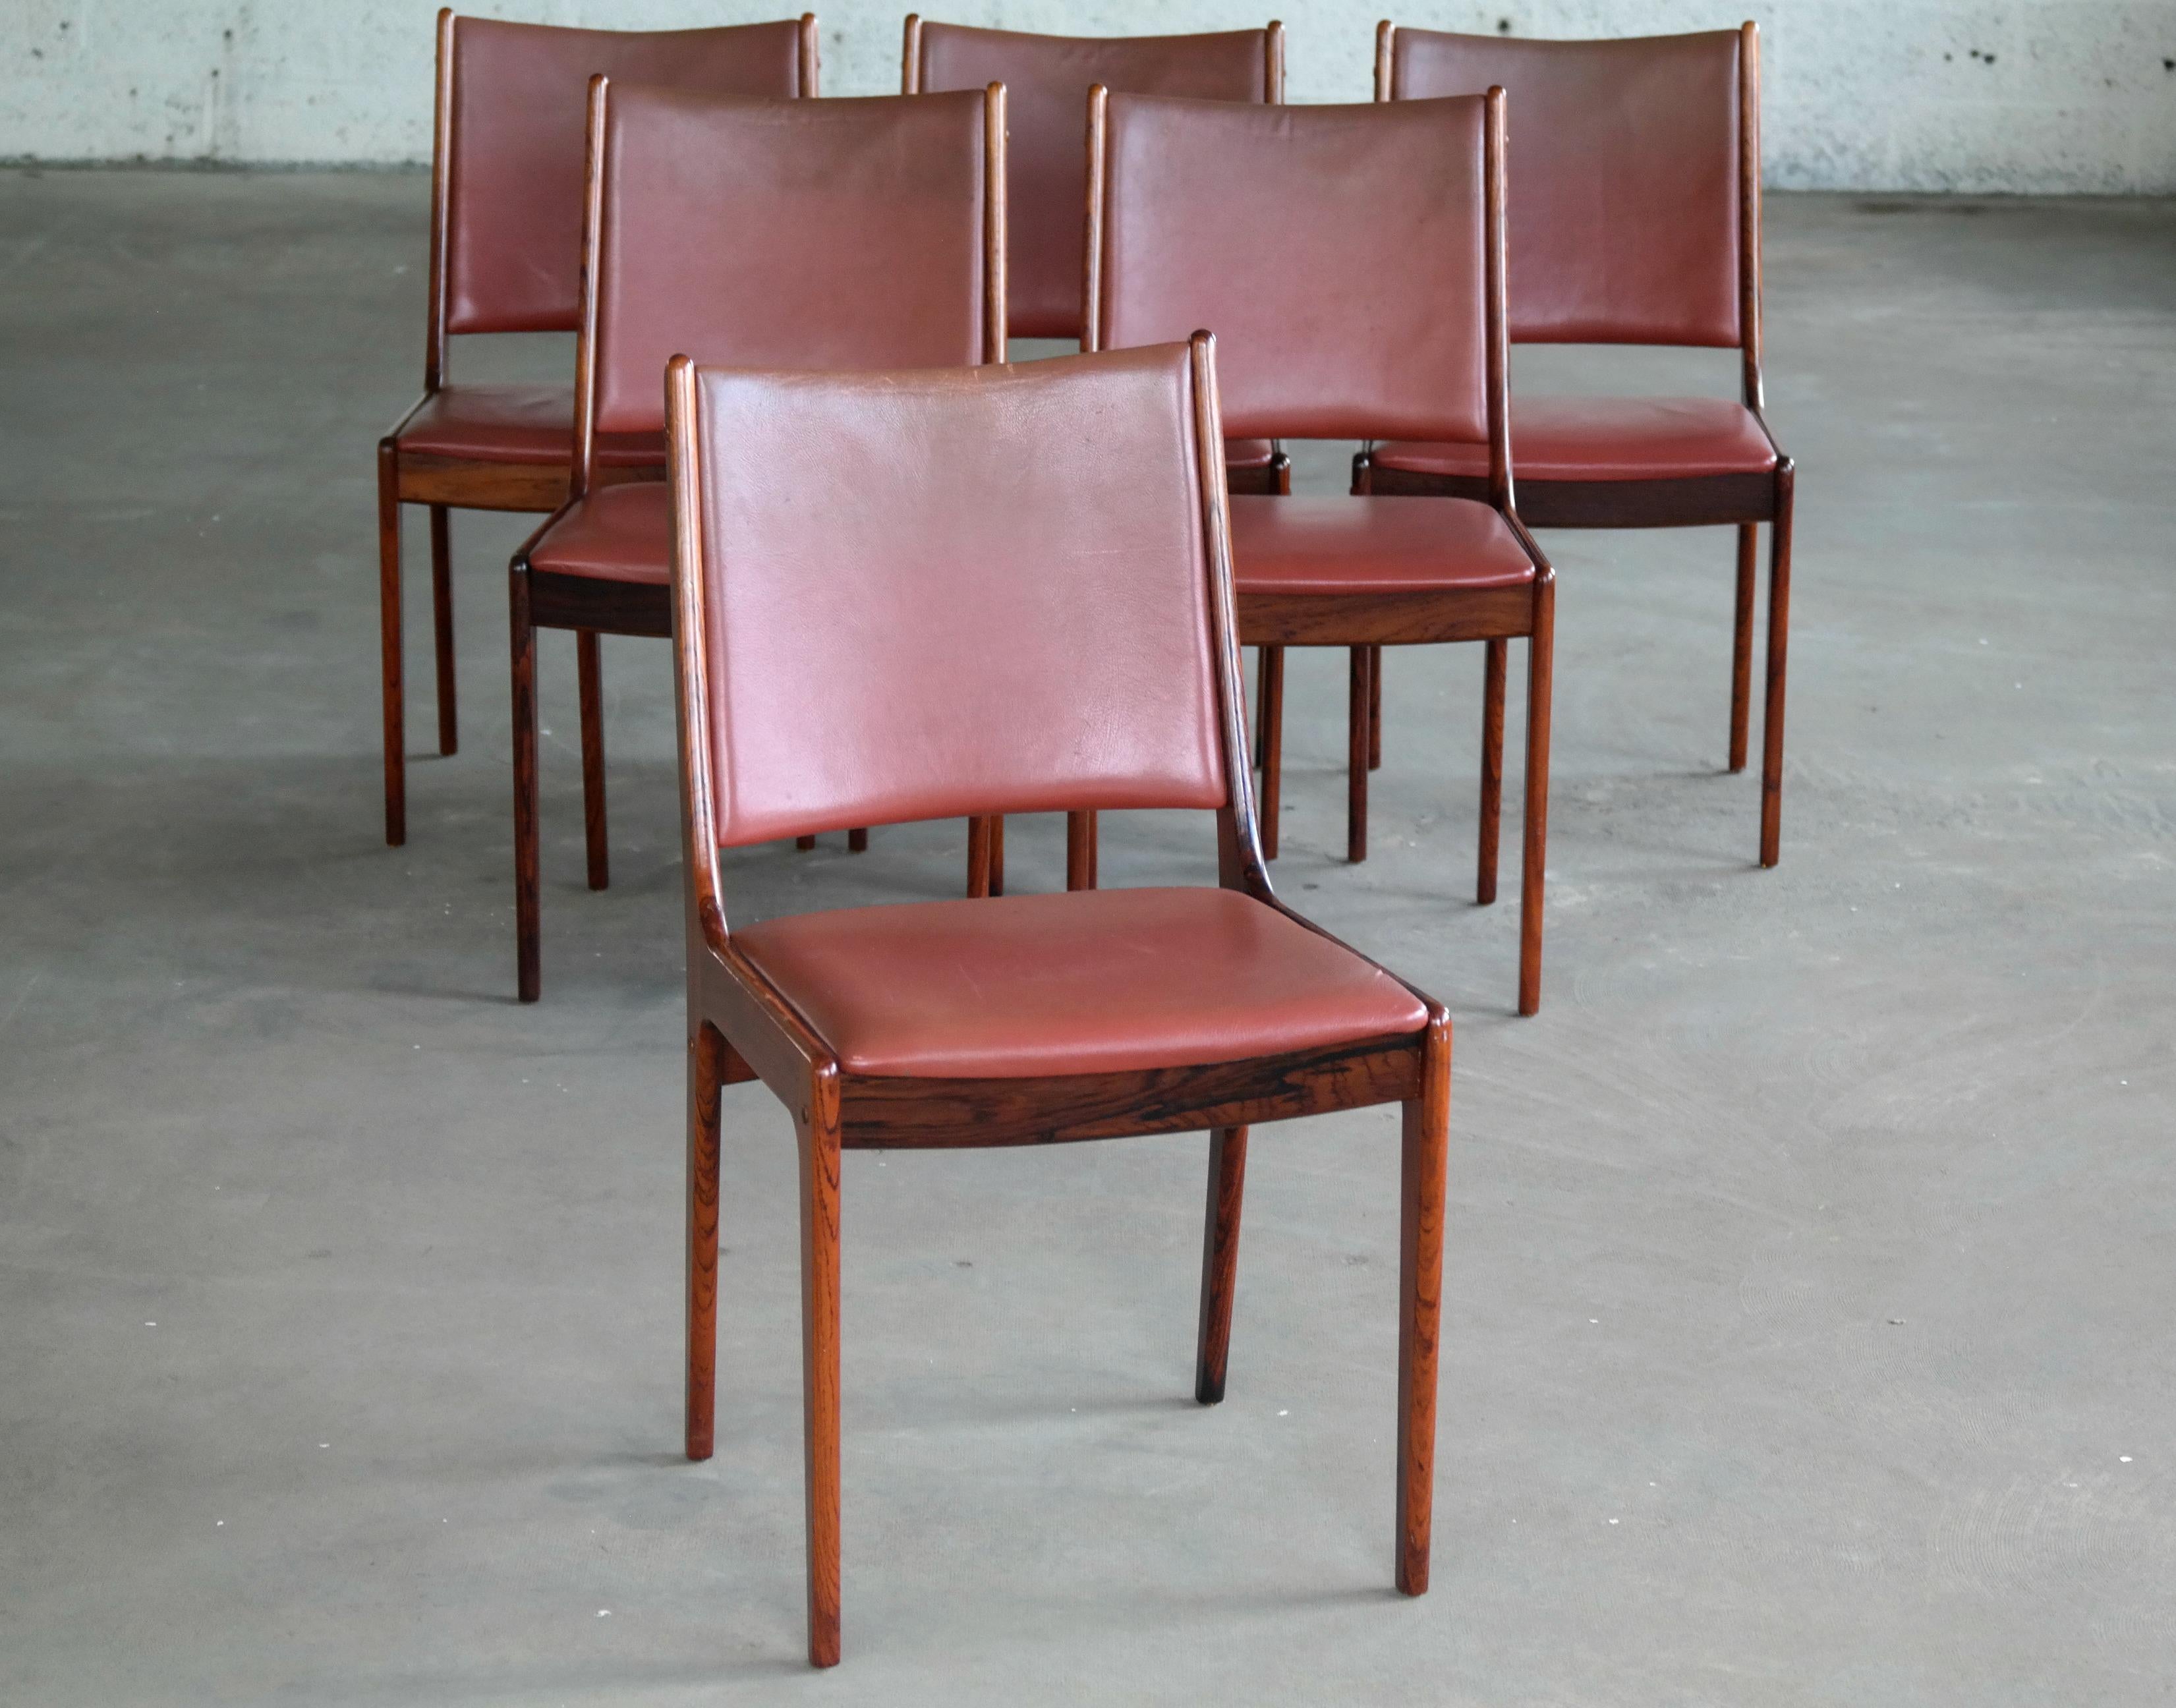 Beautiful set of six dining chairs in solid rosewood with leather covered seat and backrest designed by Johs Andersen for Uldum in the late 1960s. Classic light elegant Danish design. Overall very good to excellent condition with a couple of chairs